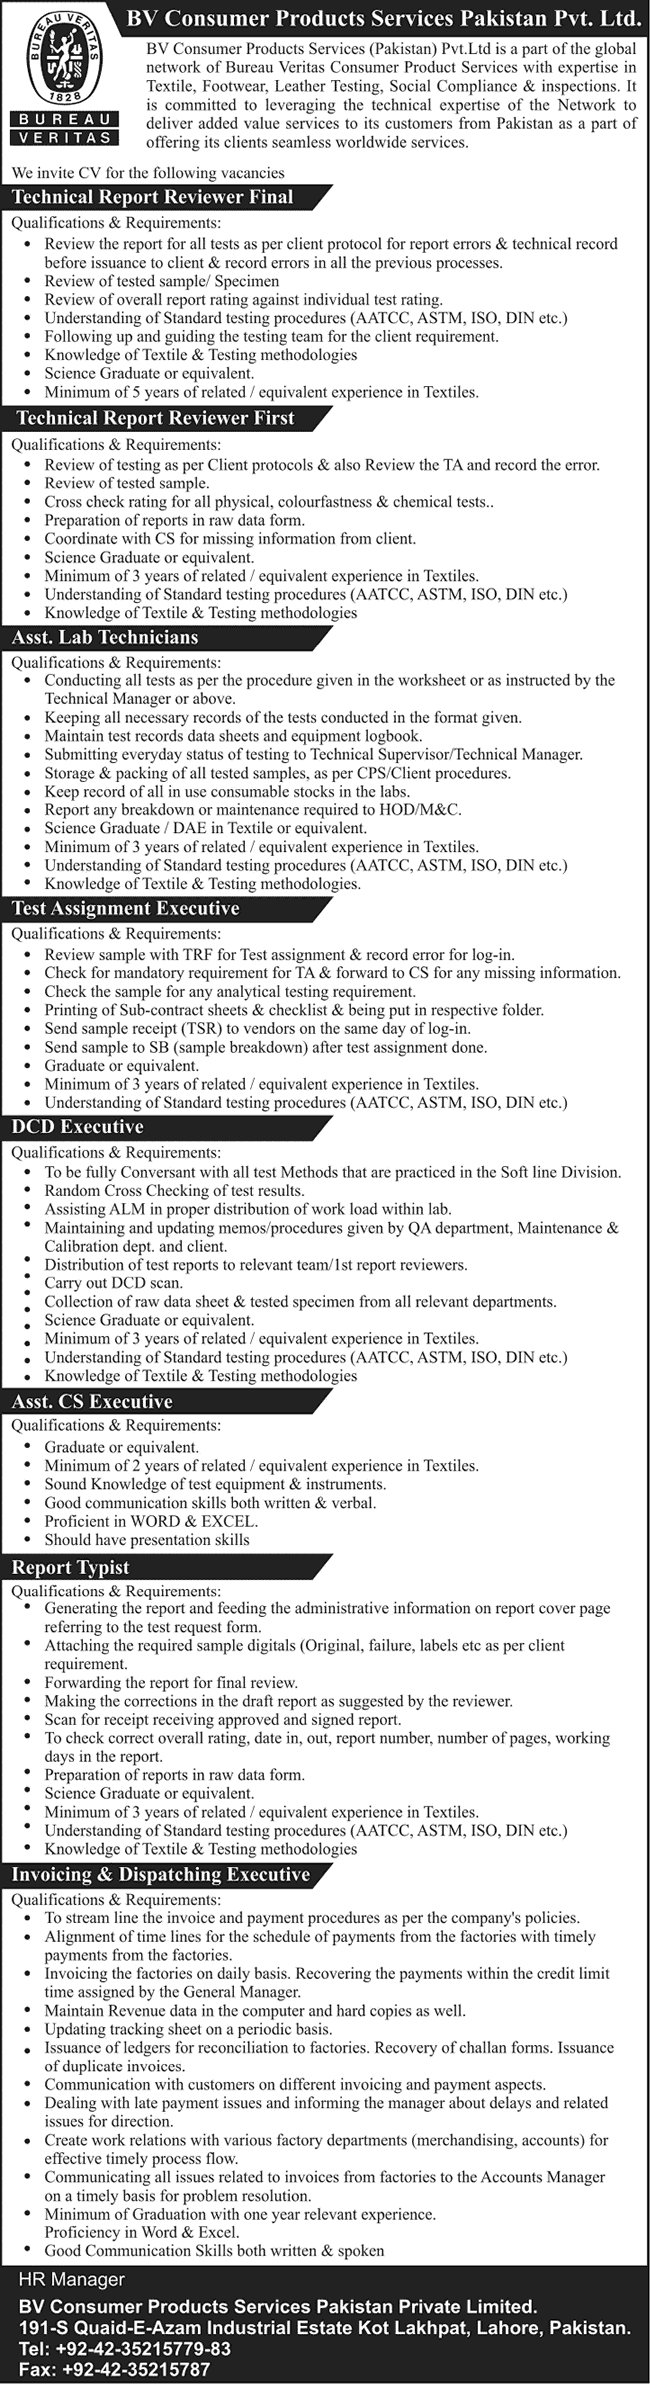 BV Consumer Products Services Pakistan (Pvt.) Ltd Lahore Jobs 2014 March Latest